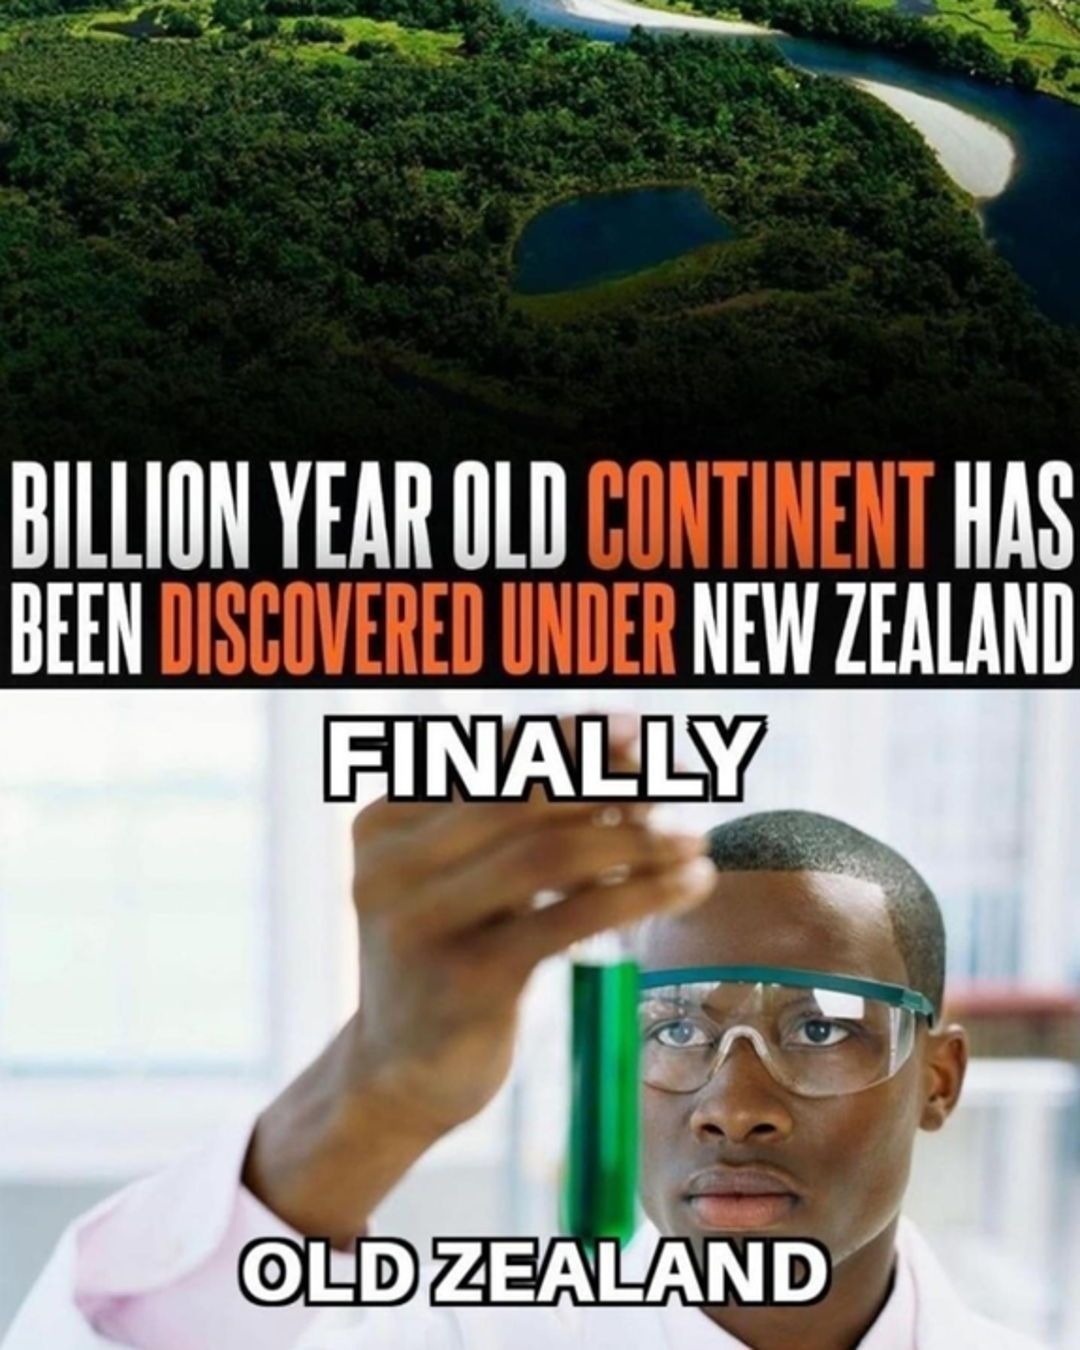 Fun fact: Old Zealand is Zeeland, which is a province of The Netherlands. - meme